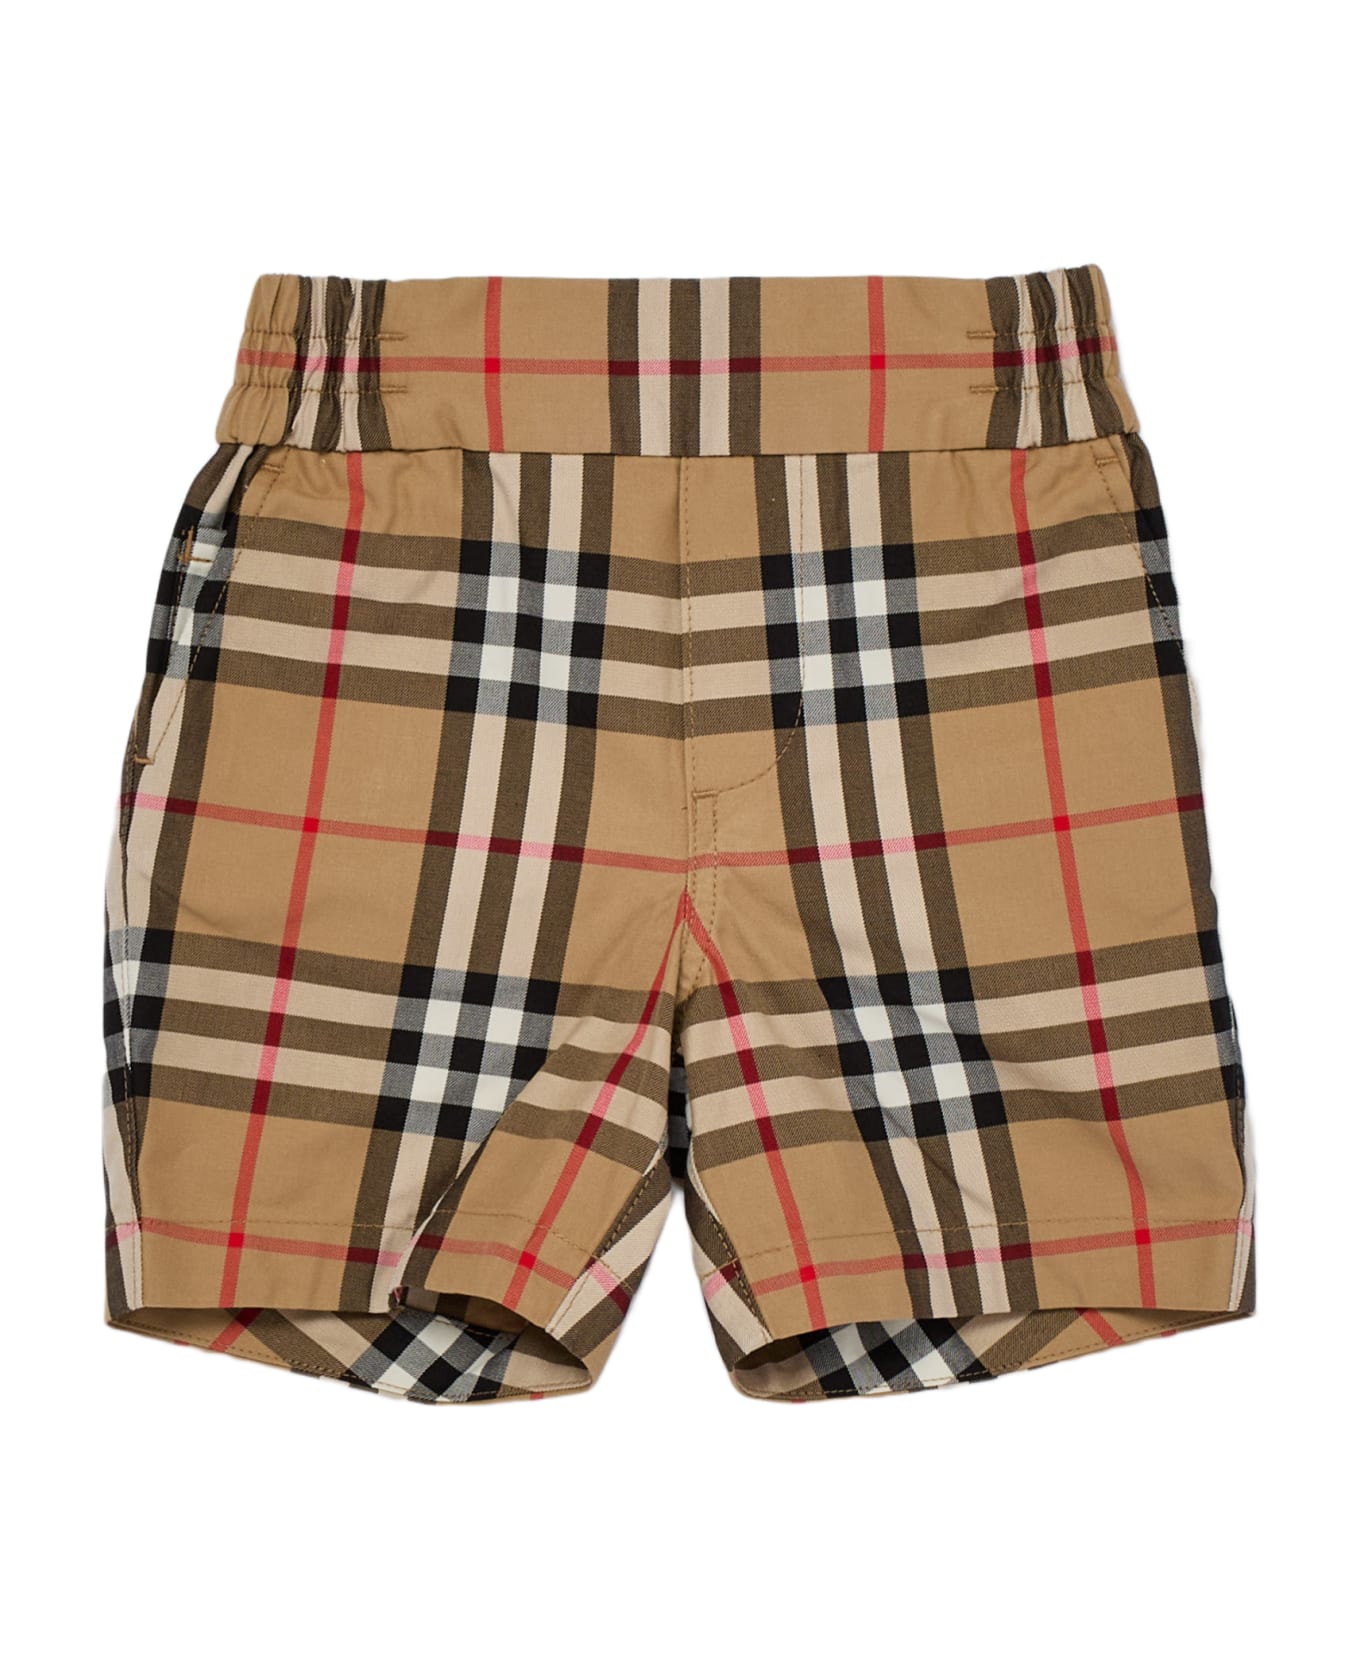 Burberry Hal Vint Shorts Shorts - CHECK BEIGE ボトムス